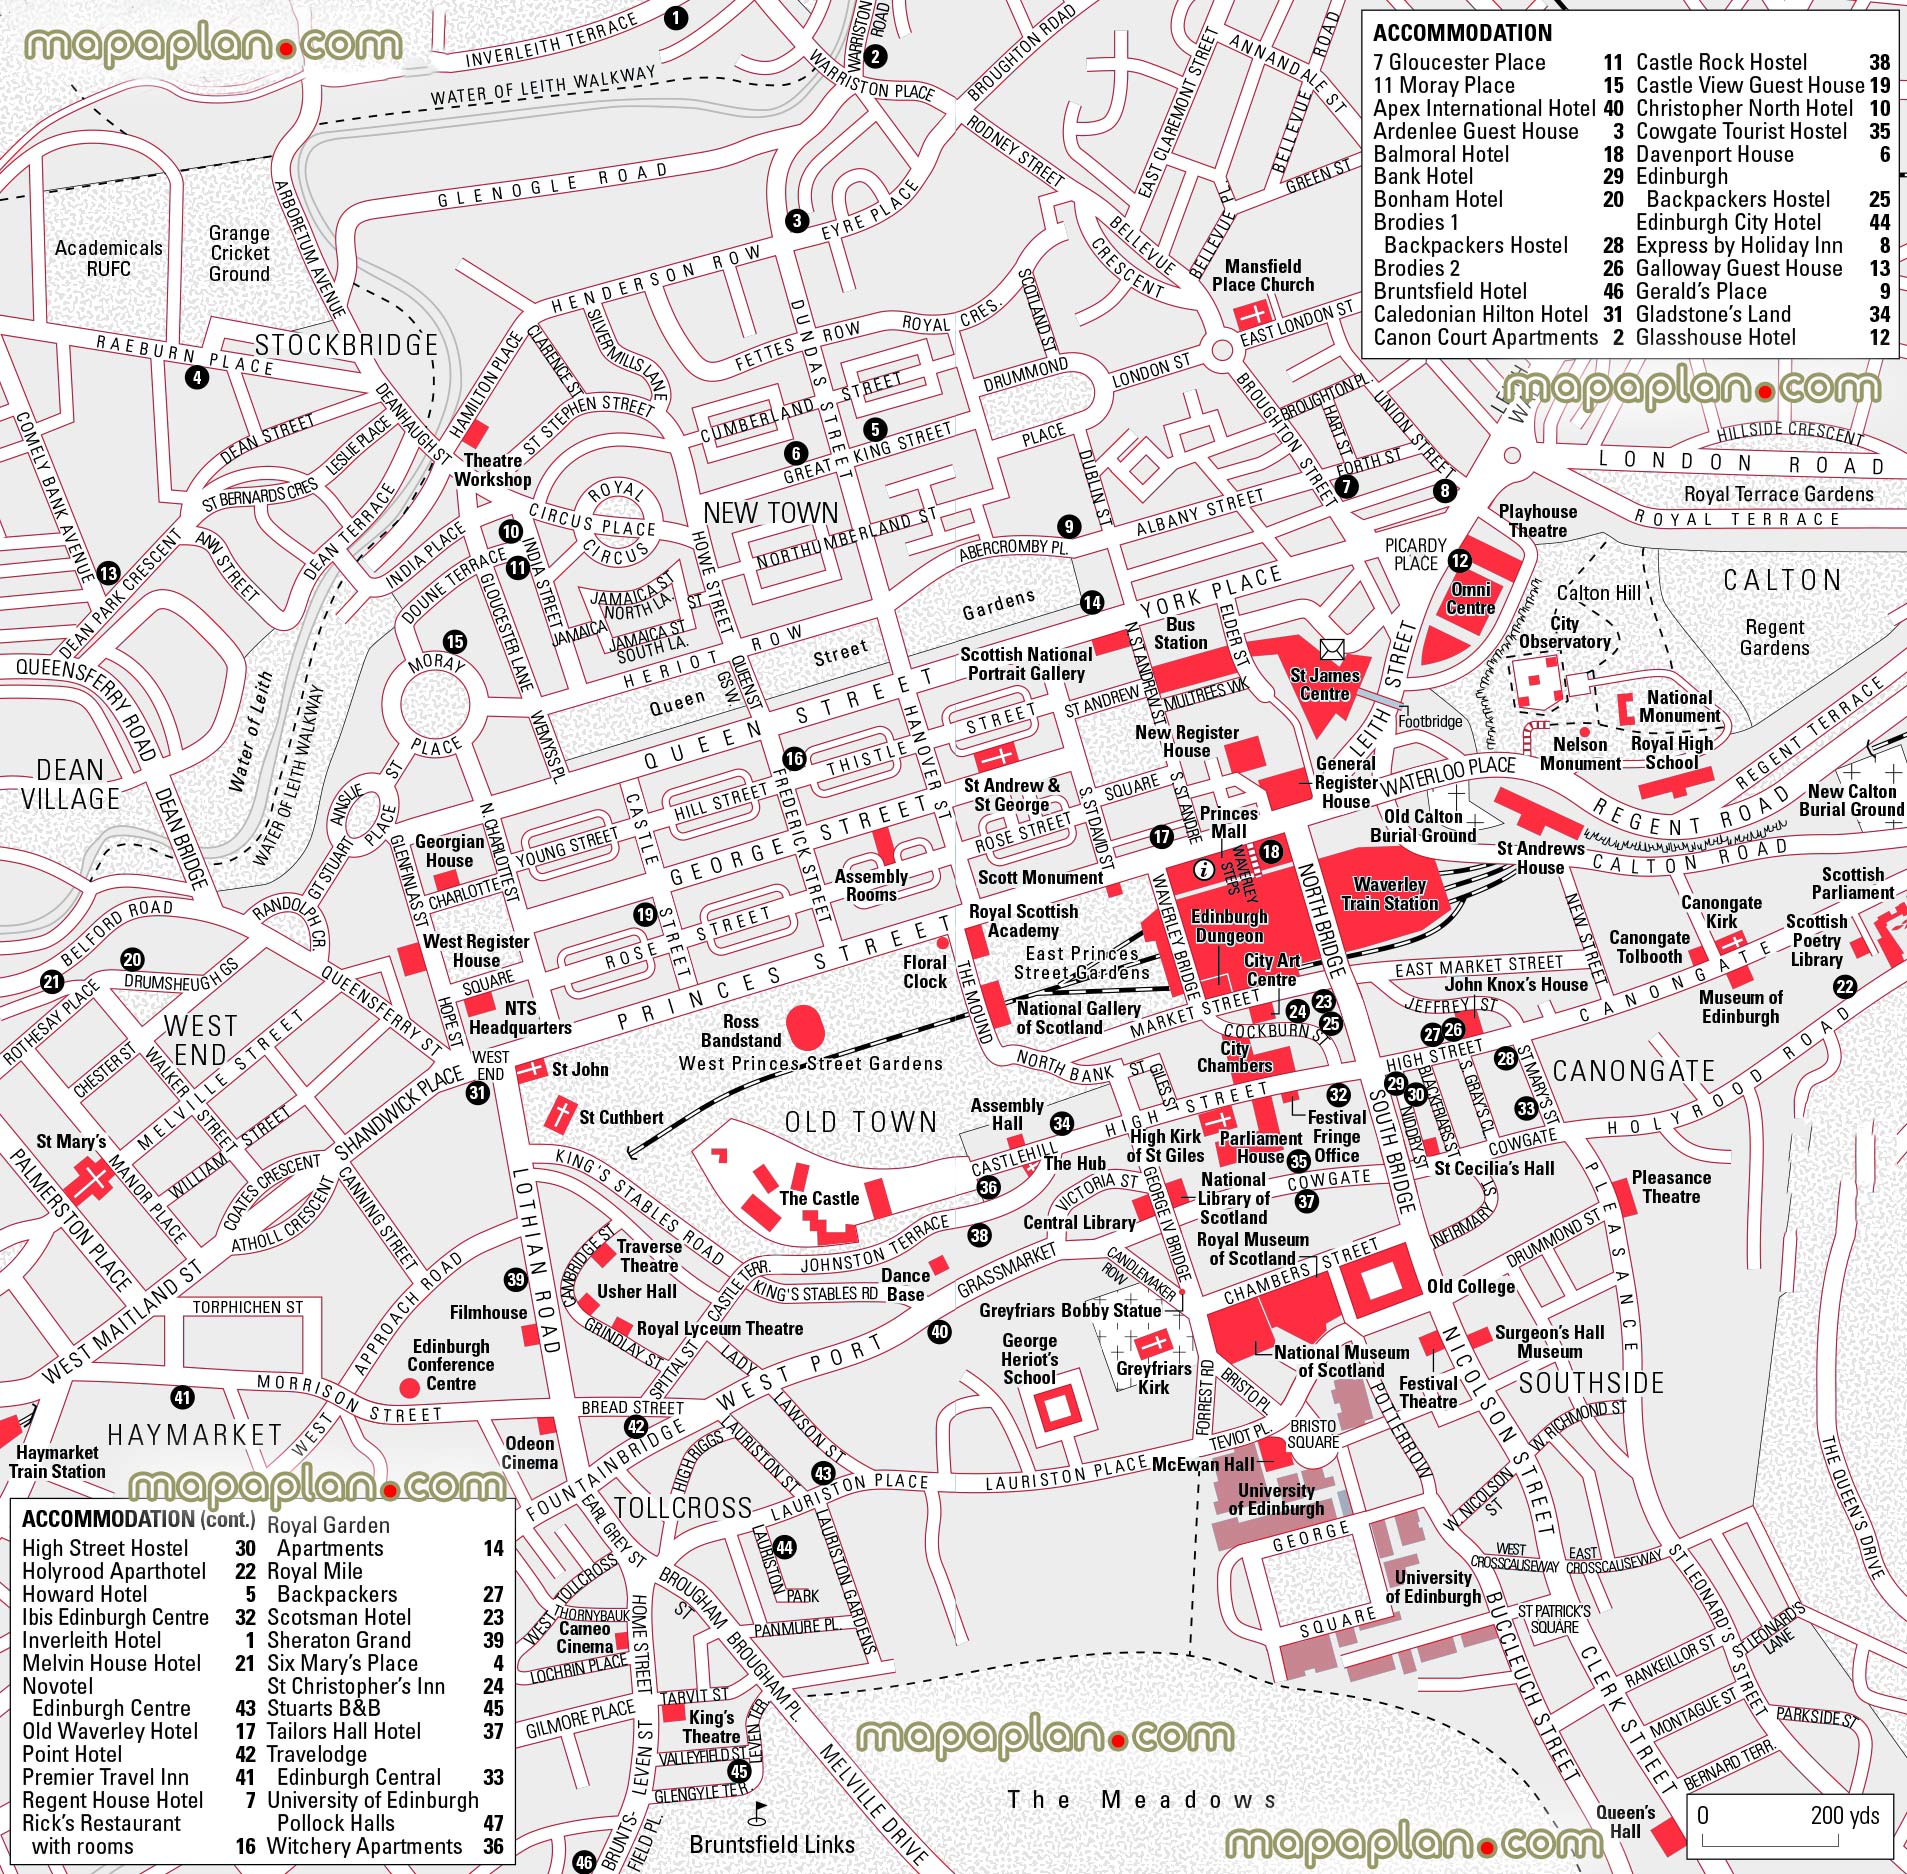 central Edinburgh hotels accommodation downtown city attractions best sights a week detailed street plans Edinburgh Top tourist attractions map